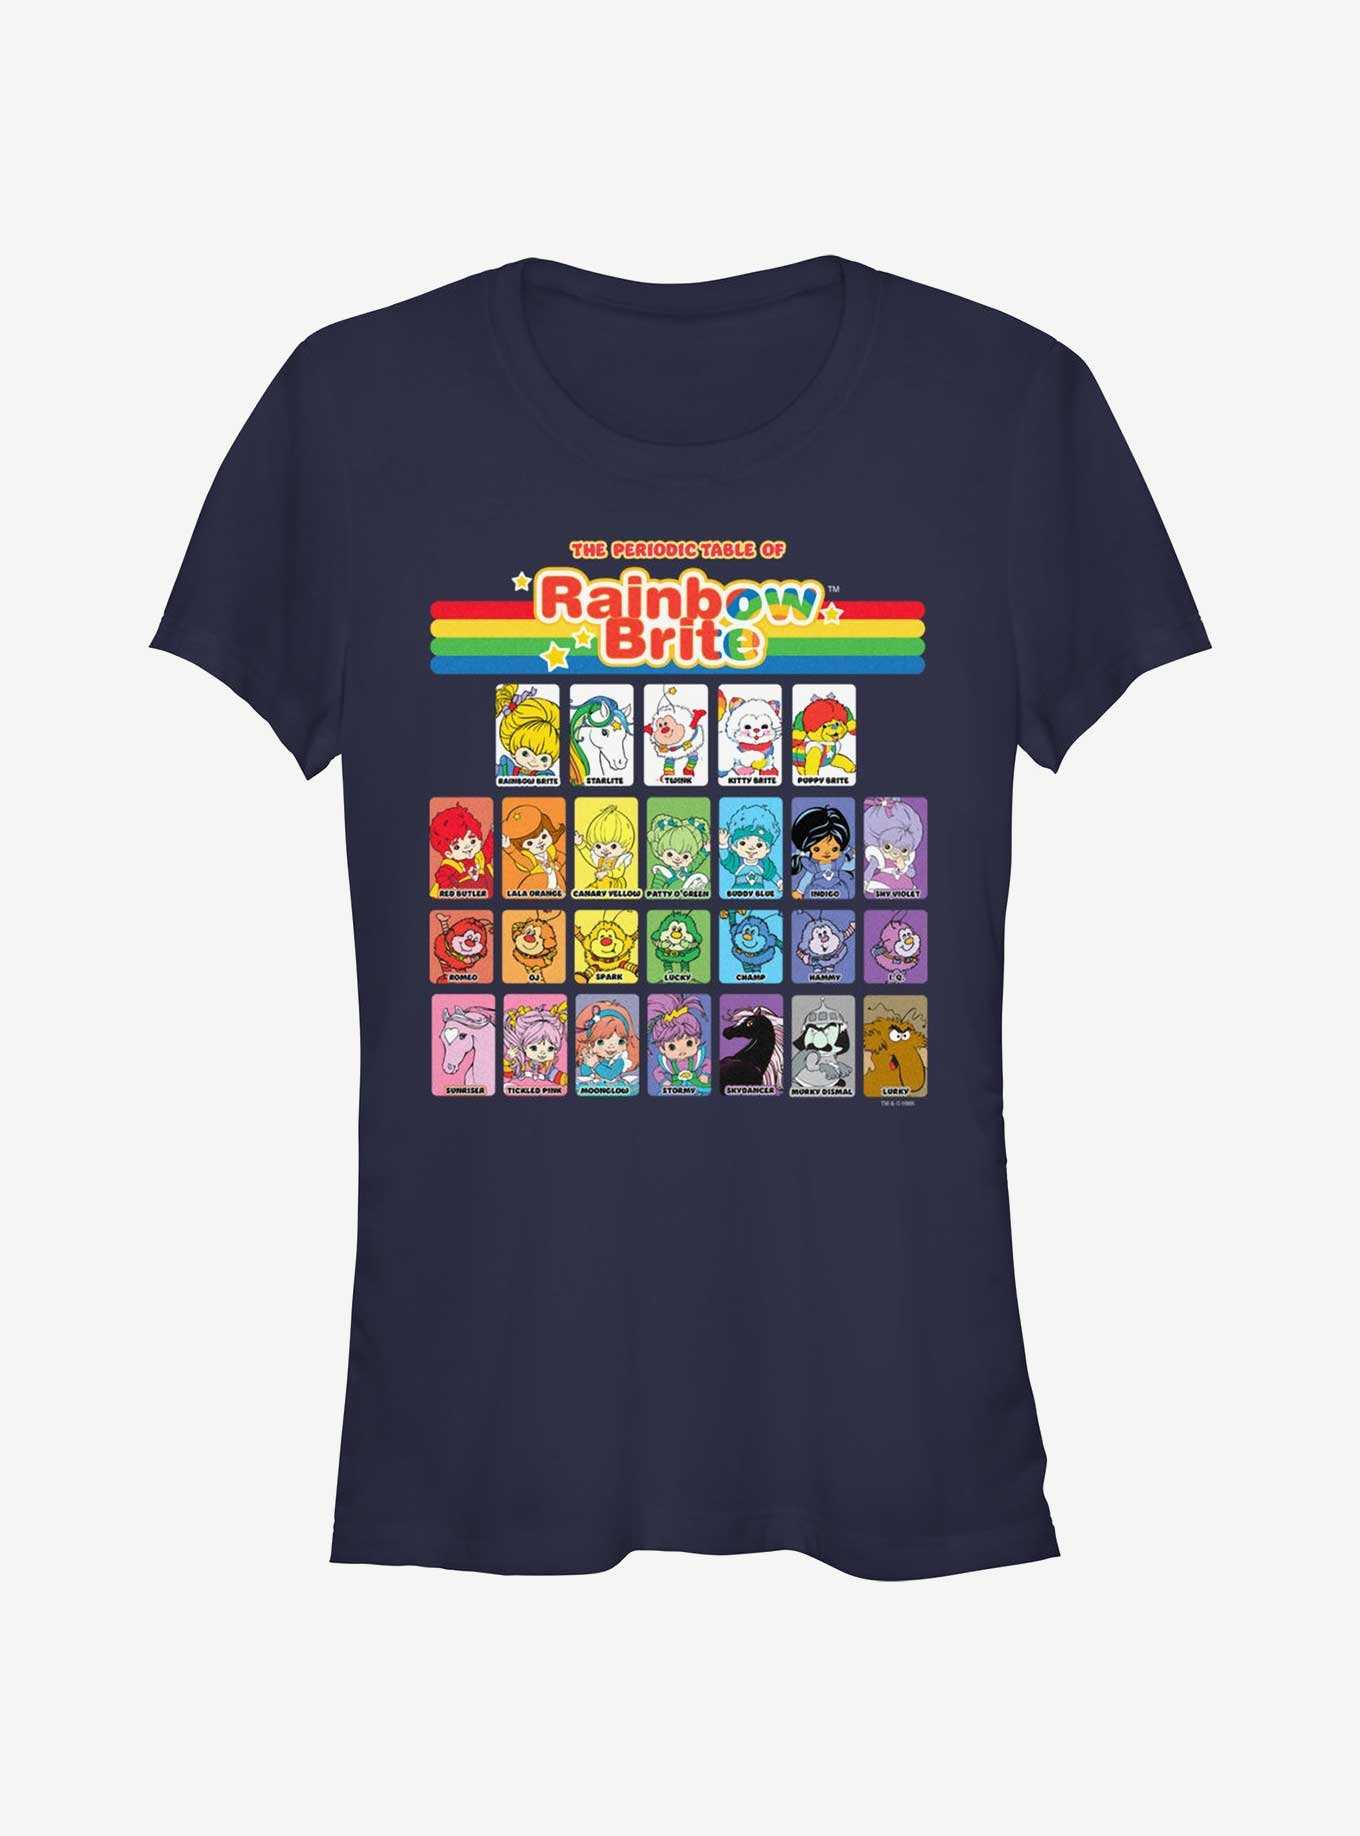 Rainbow Brite Table Of Color Girls T-Shirt, , hi-res